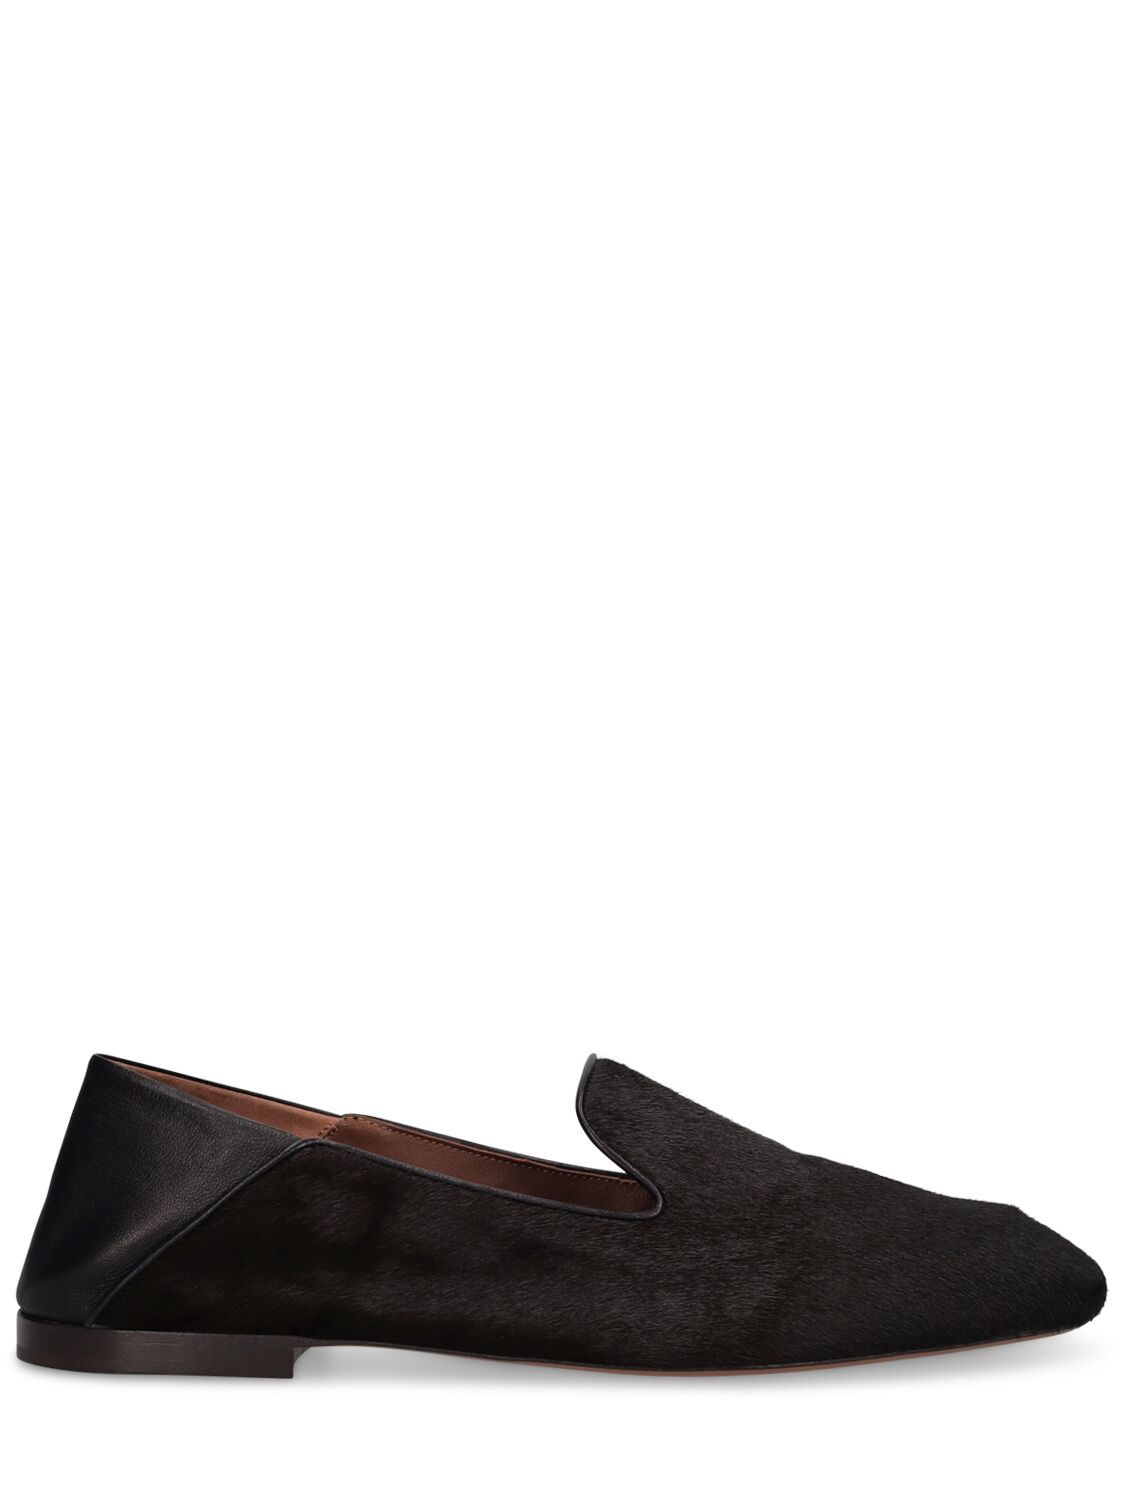 Image of Flat Leather Loafers